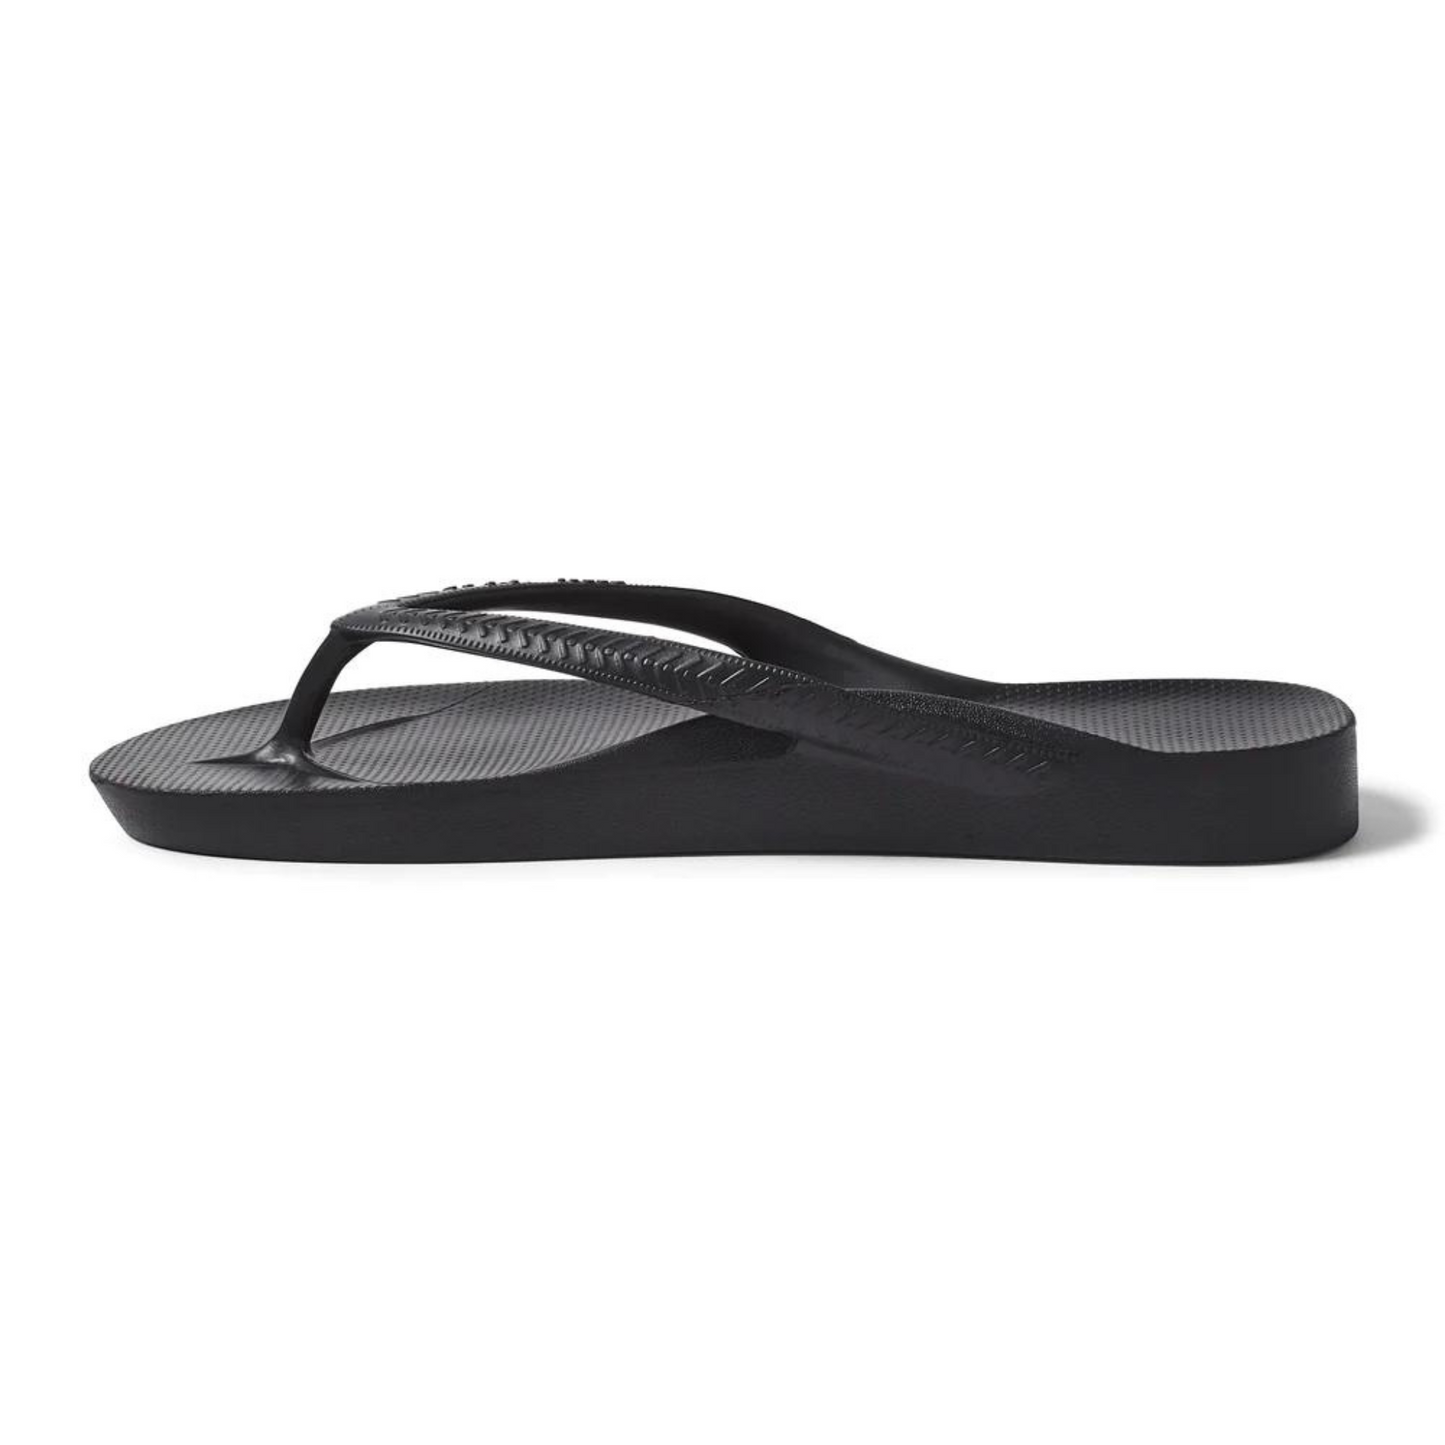 Archies Arch Support Jandals - Black